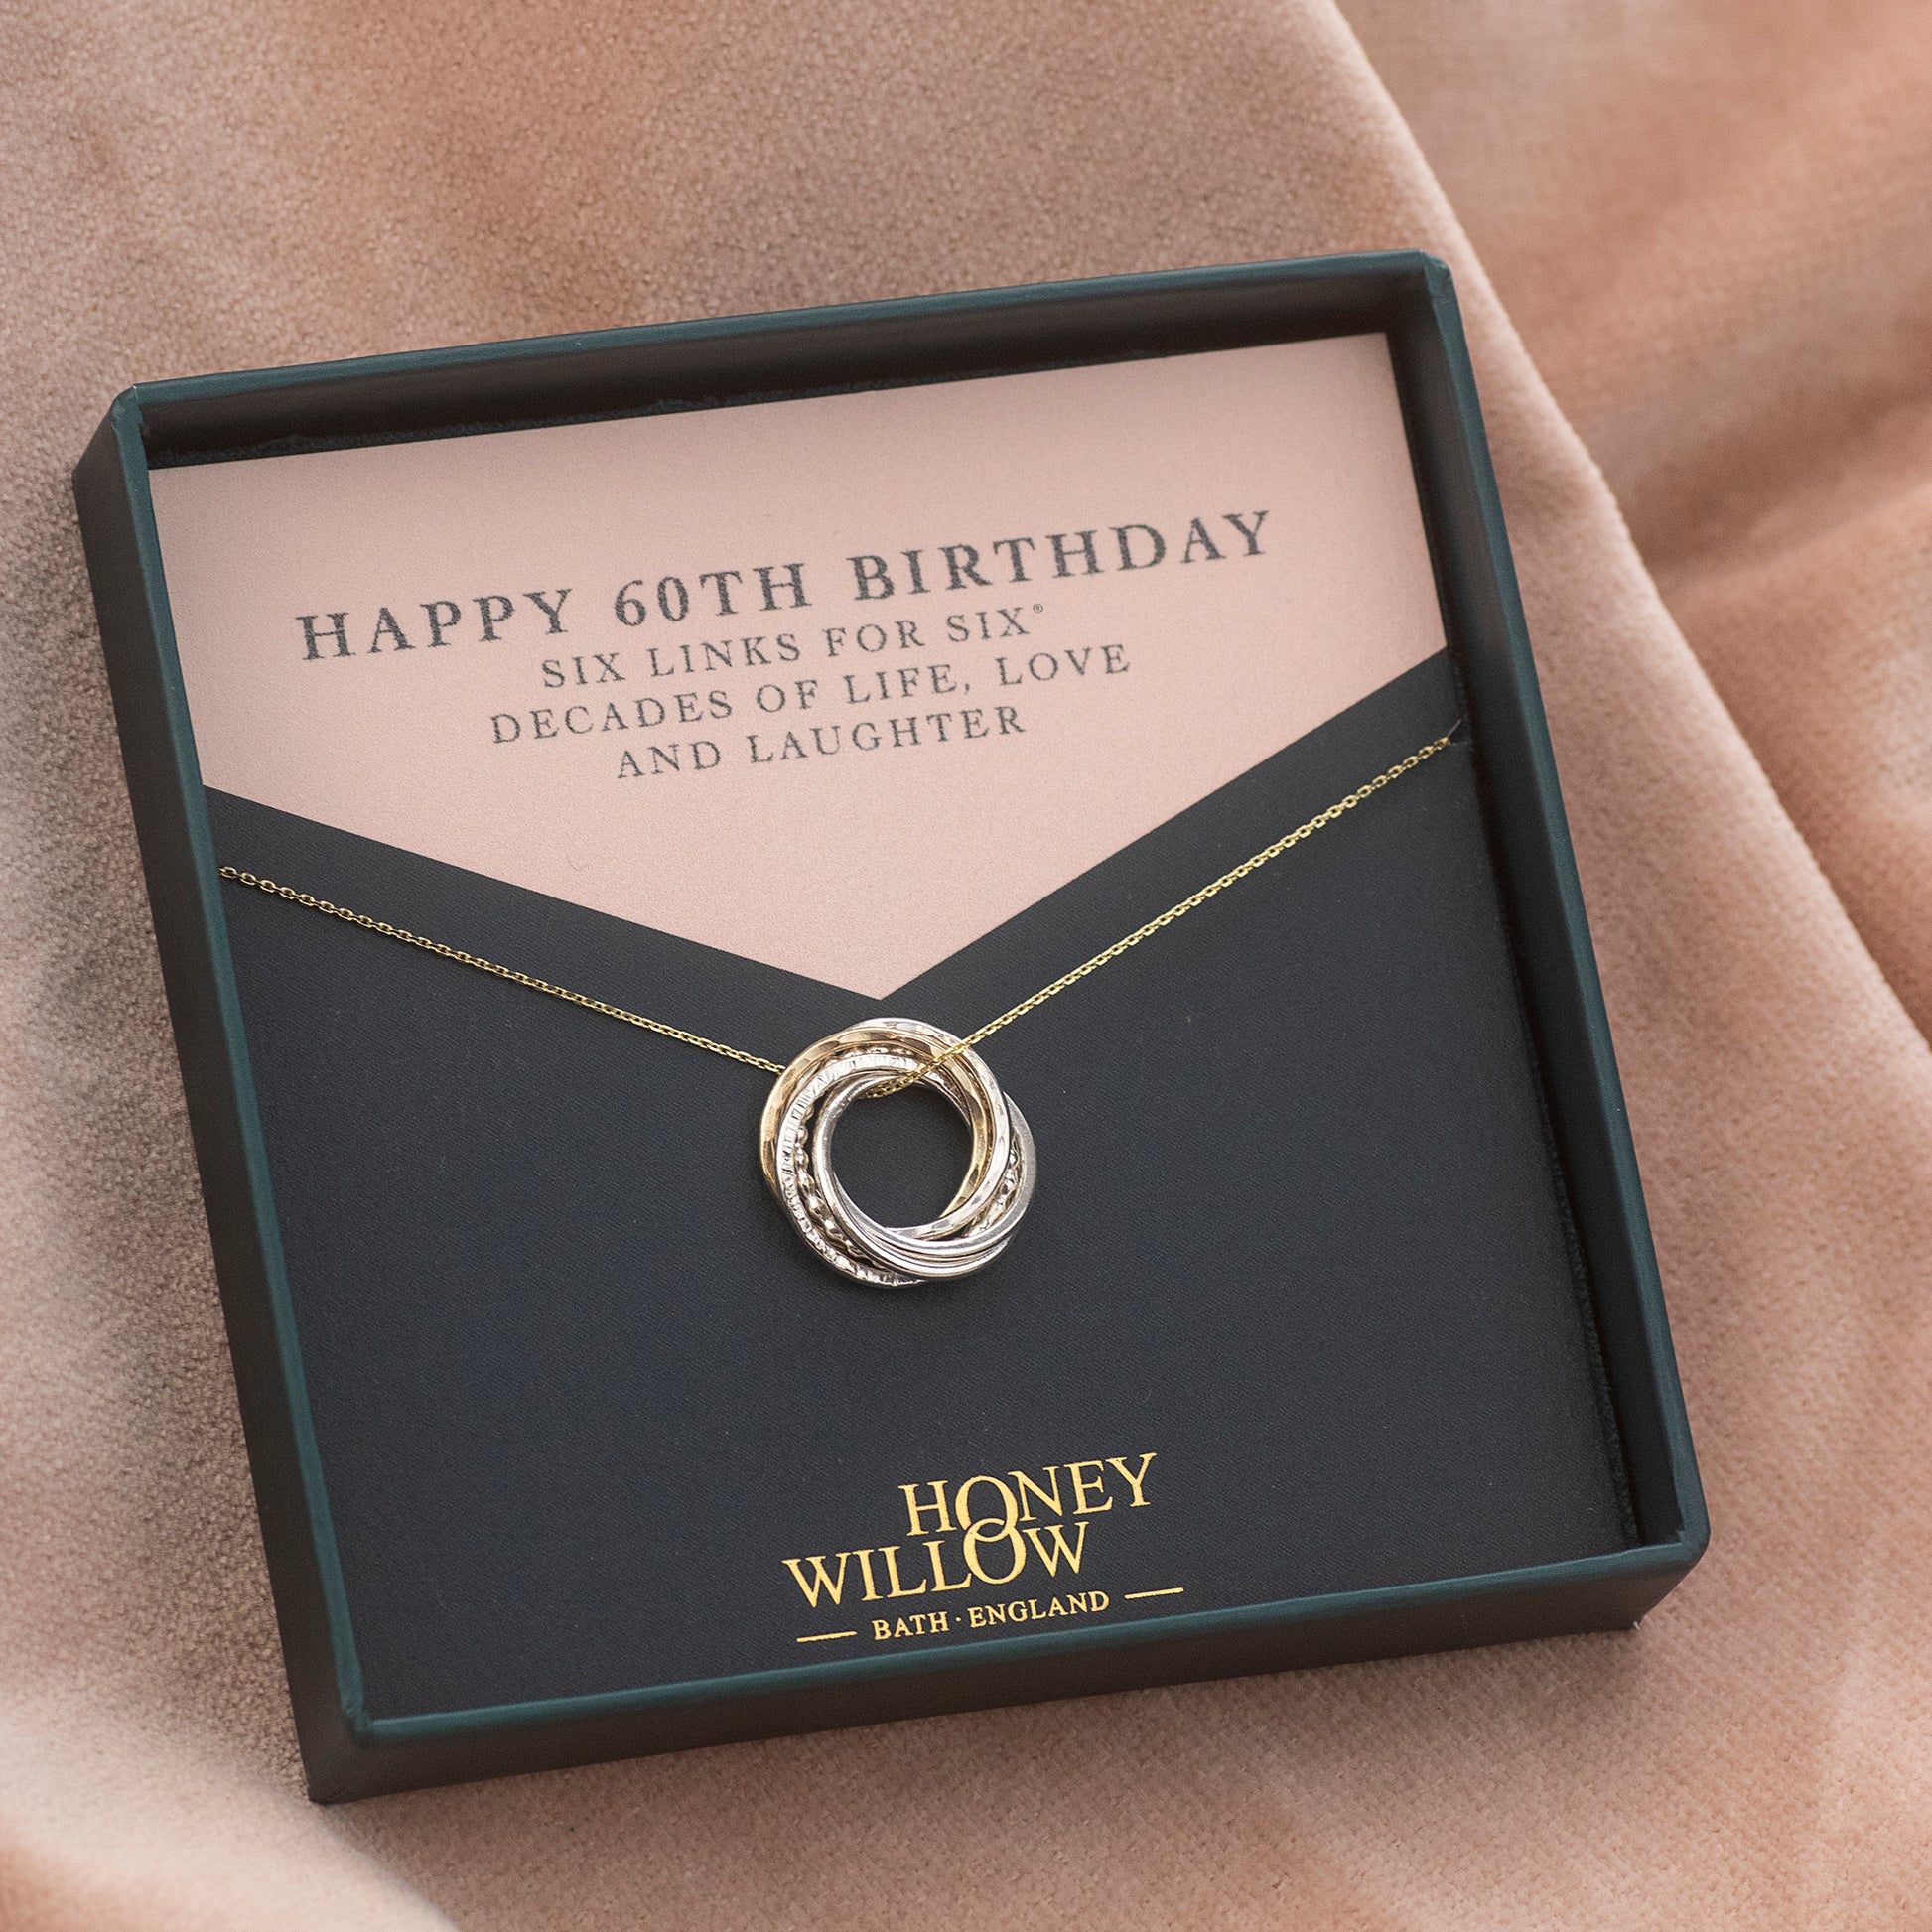 60th Birthday Necklace - The Original 6 Links for 6 Decades Necklace - Silver & 9kt Gold